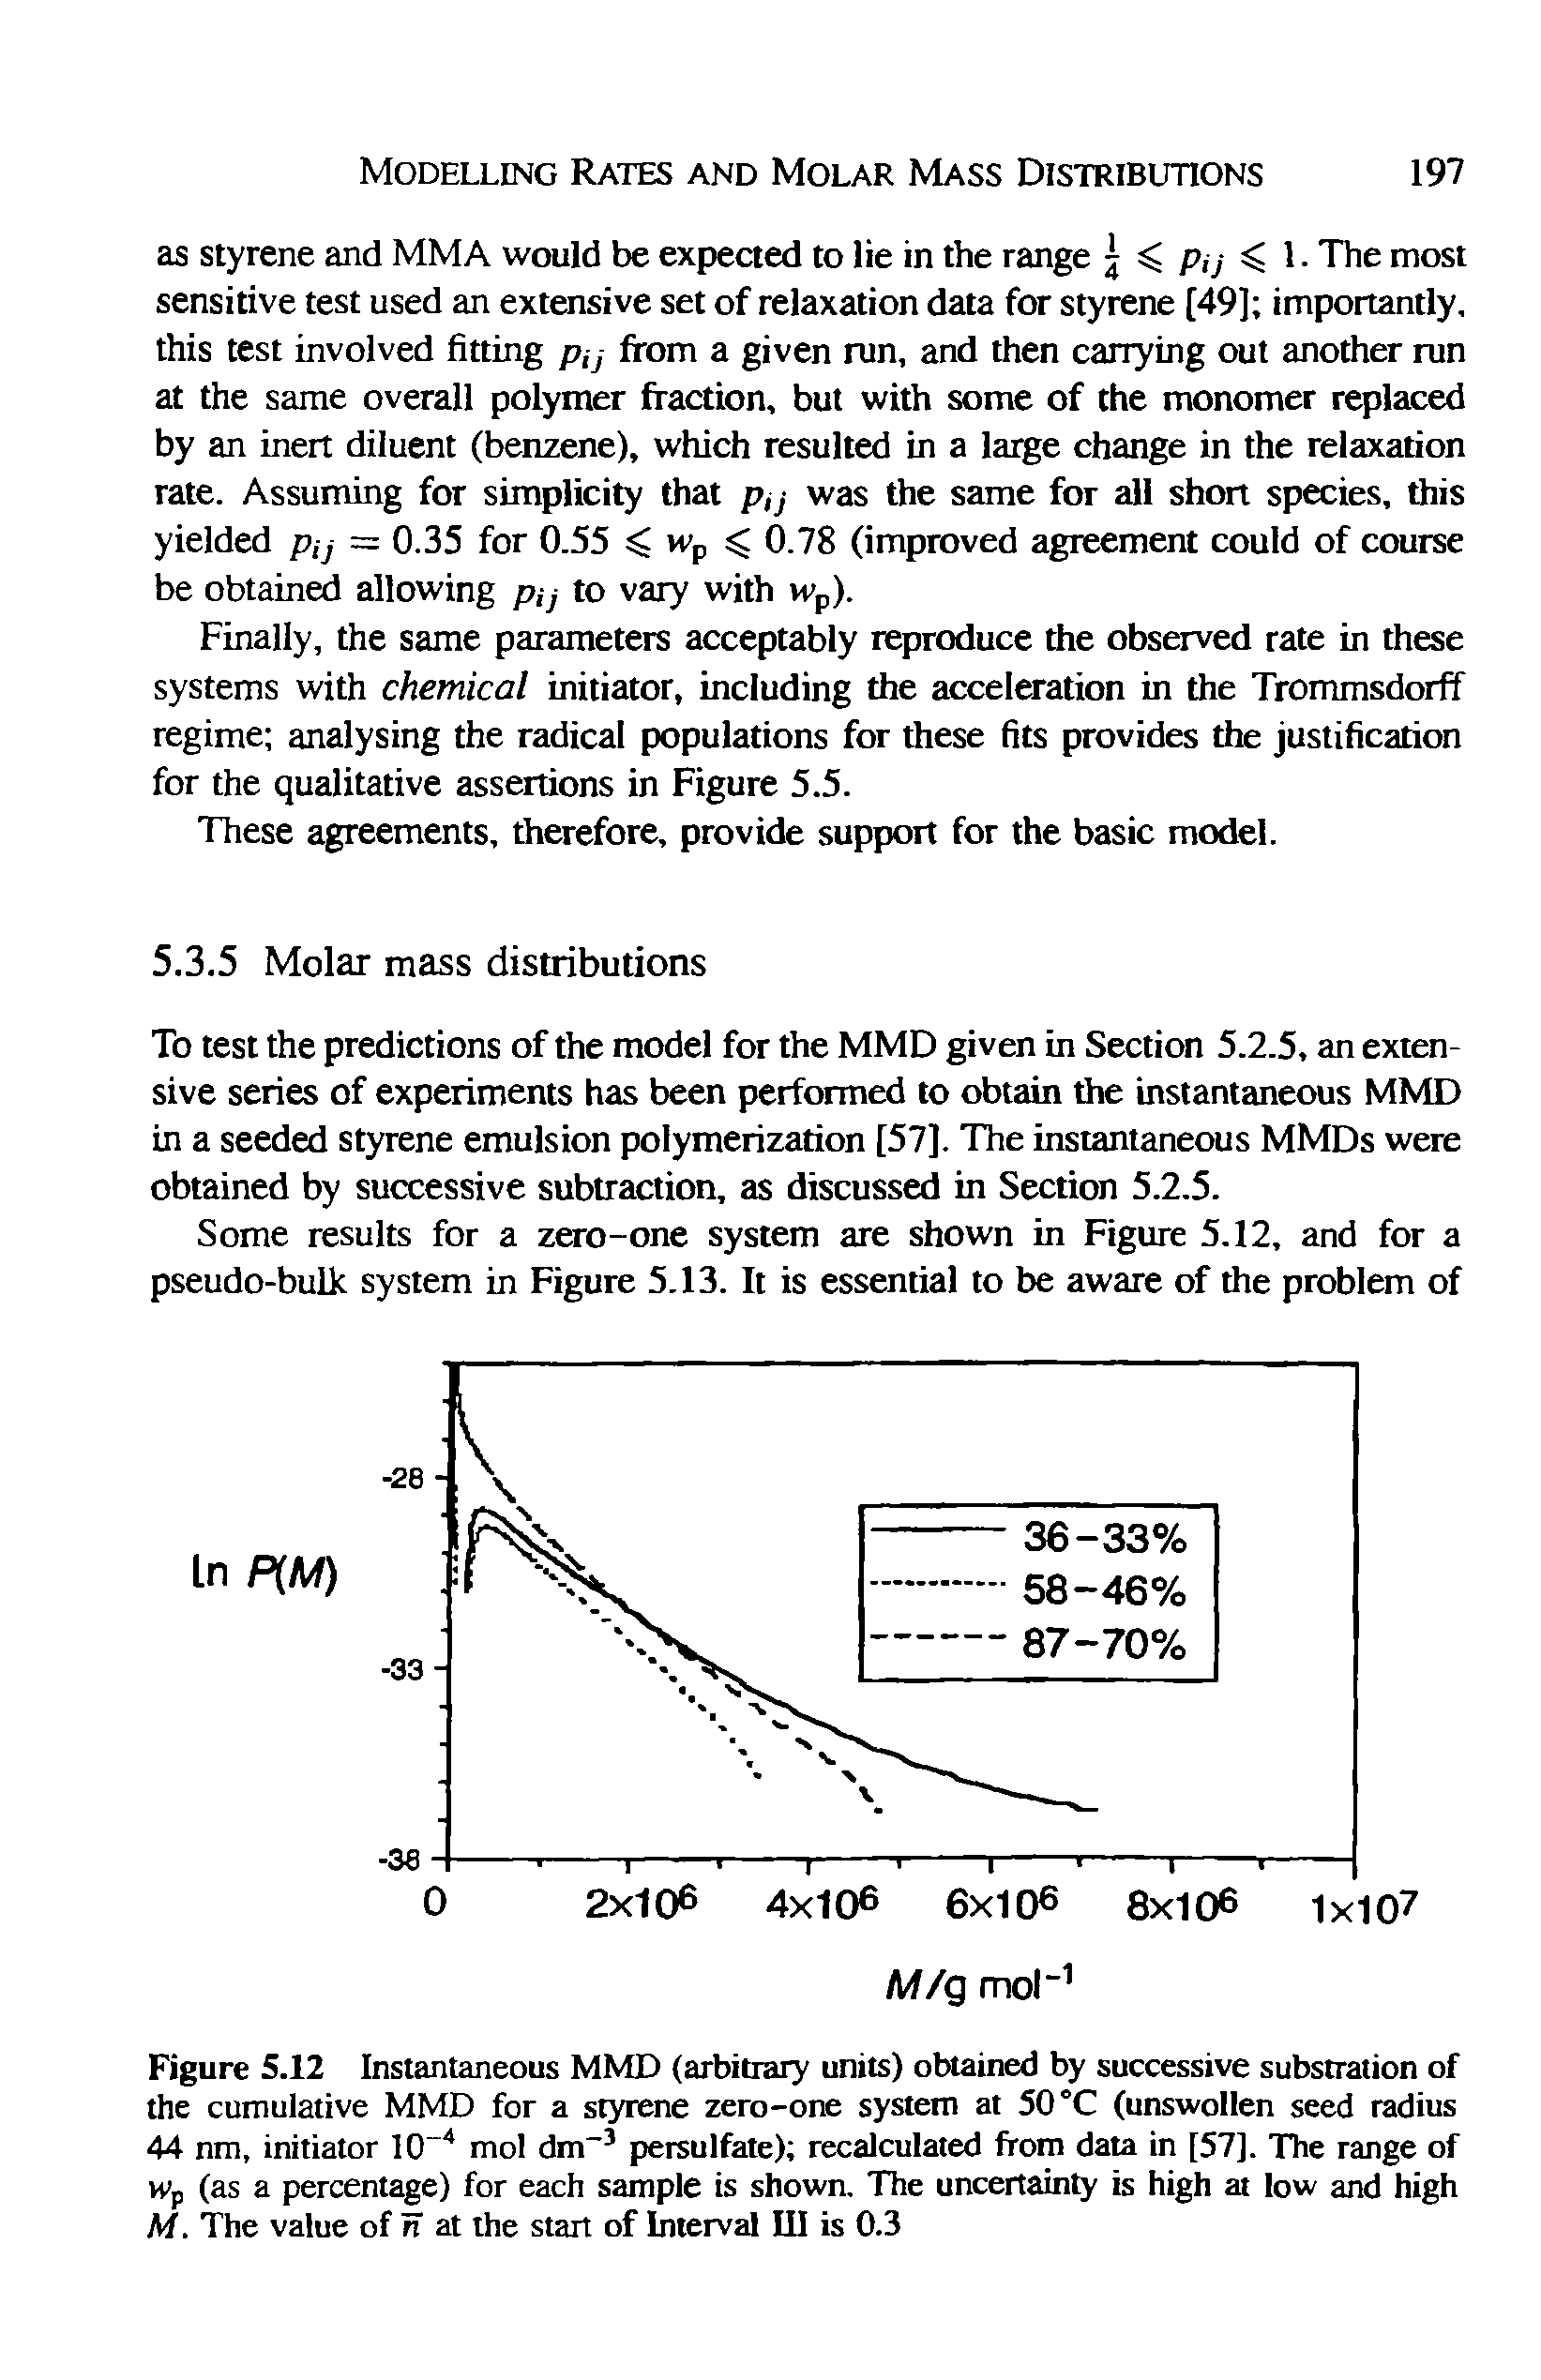 Figure S.12 Instantaneous MMD (arbitrary units) obtained by successive substration of the cumulative MMD for a styrene zero-one system at 50 °C (unswollen seed radius 44 nm, initiator 10 mol dm persulfate) recalculated from data in [57]. The range of Wp (as a percentage) for each sample is shown. The uncertainty is high at low and high M. The value of n at the start of Interval III is 0.3...